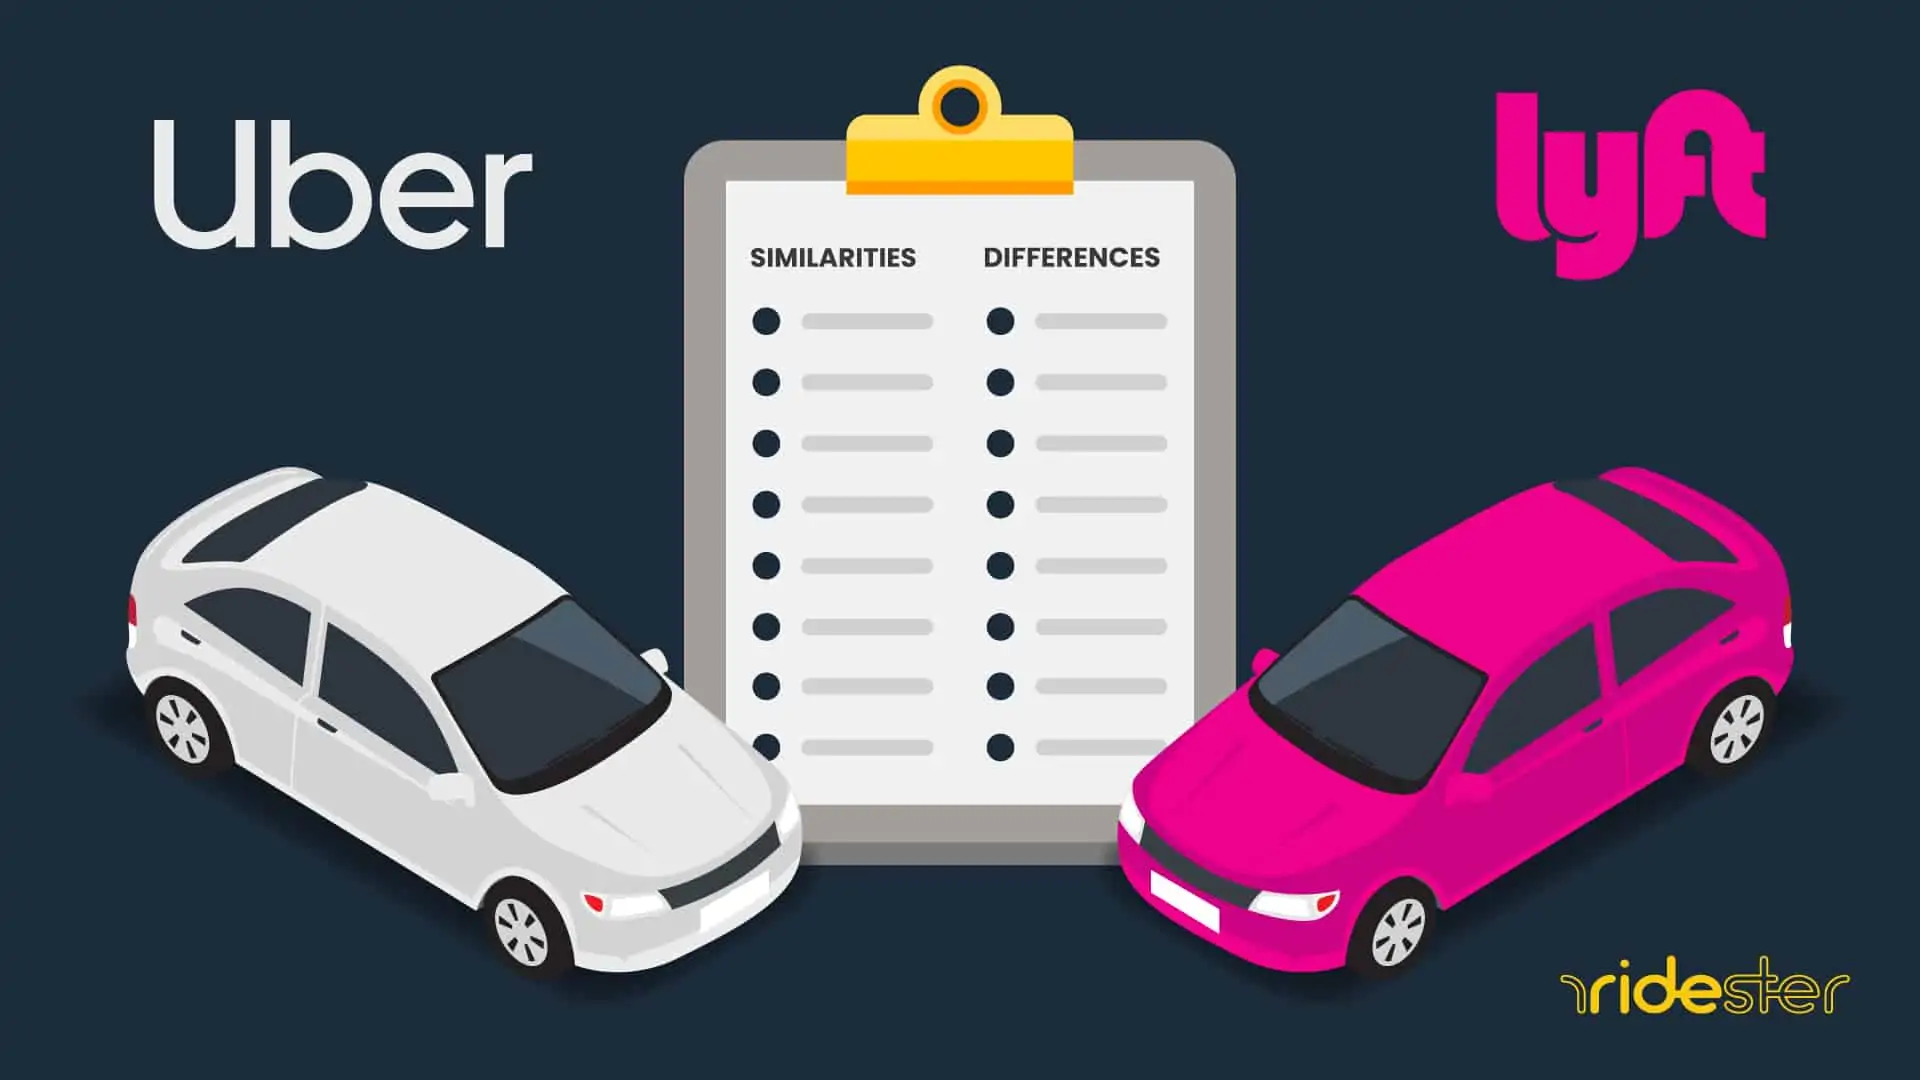 vector graphic showing the similarities and differences between Uber vs Lyft